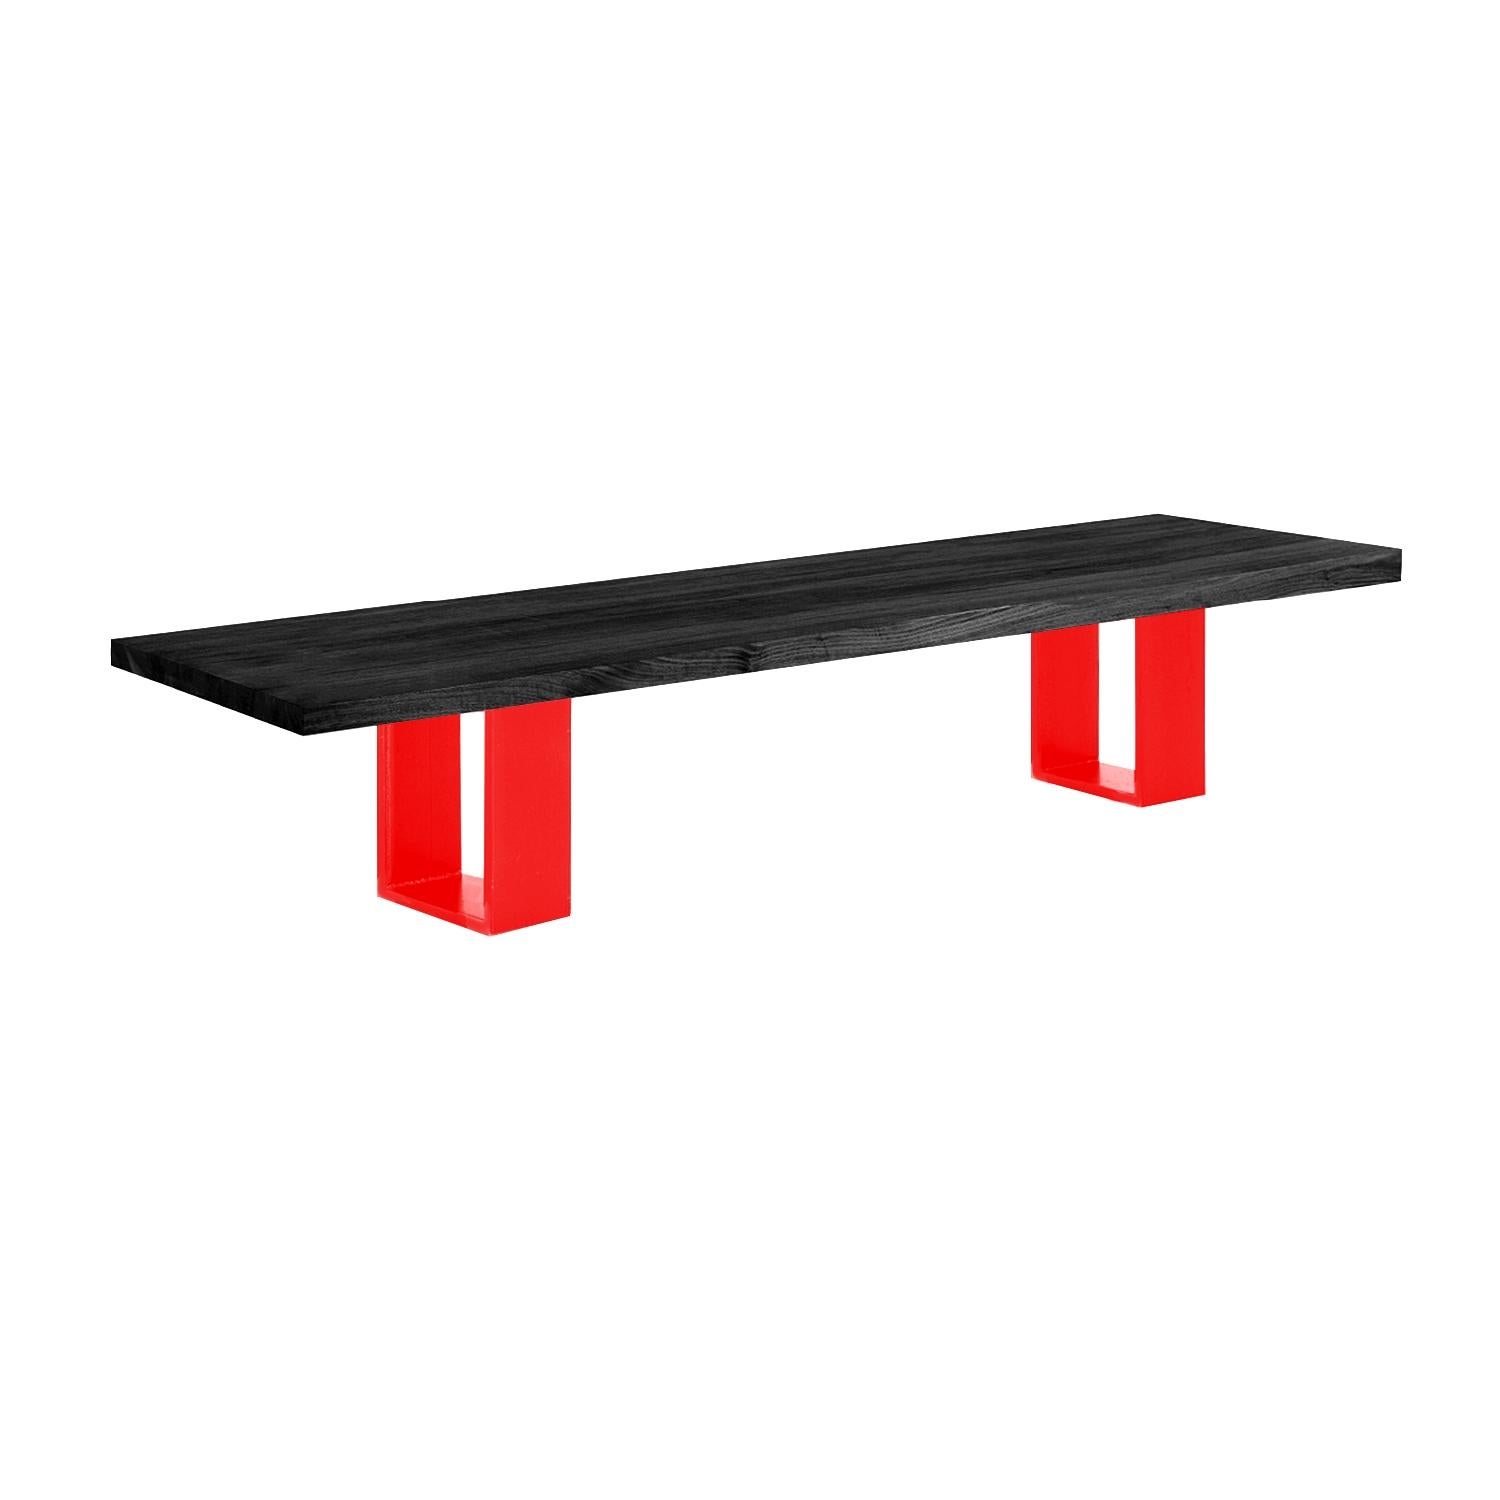 Italian Newton, 63 Inches Black Vulcano and Red Iron Legs Bench, Made in Italy For Sale